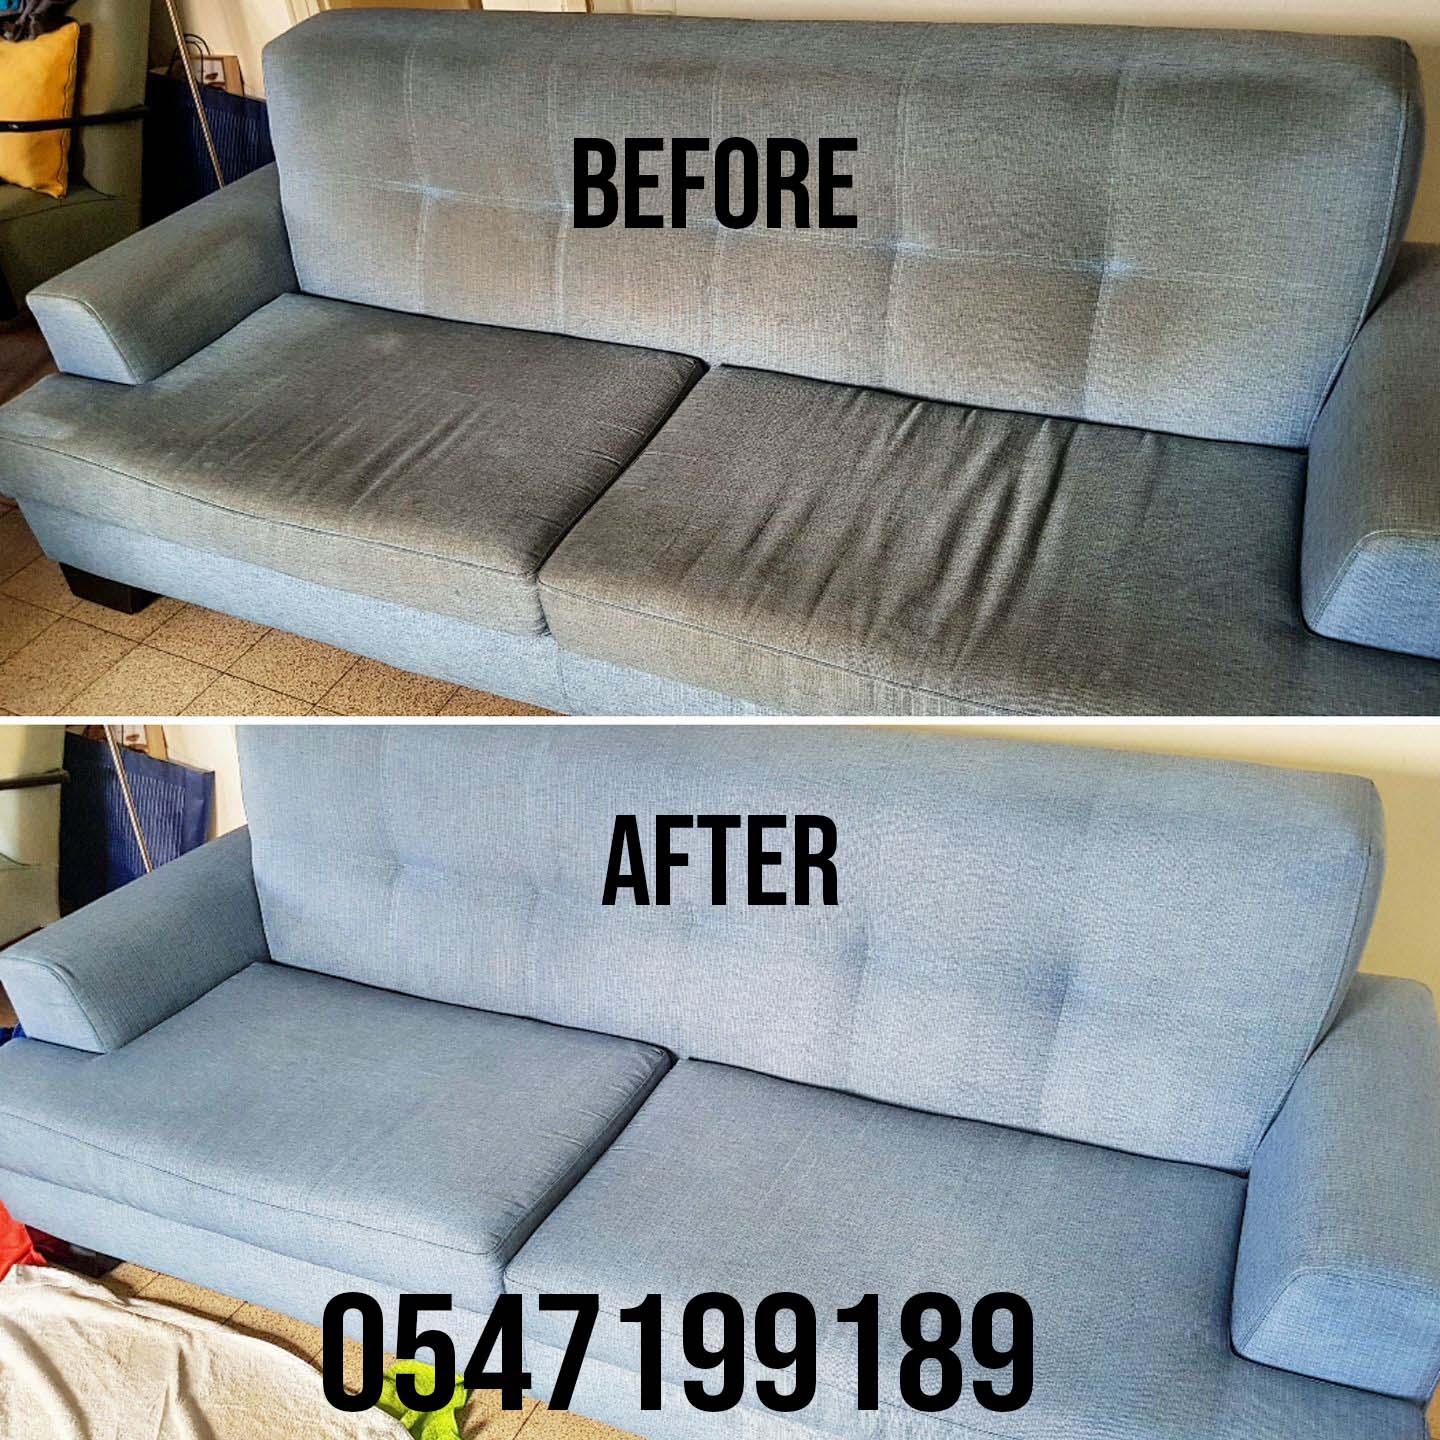 Sofa Cleaning Services In Dubai Silicon Oasis 0547199189